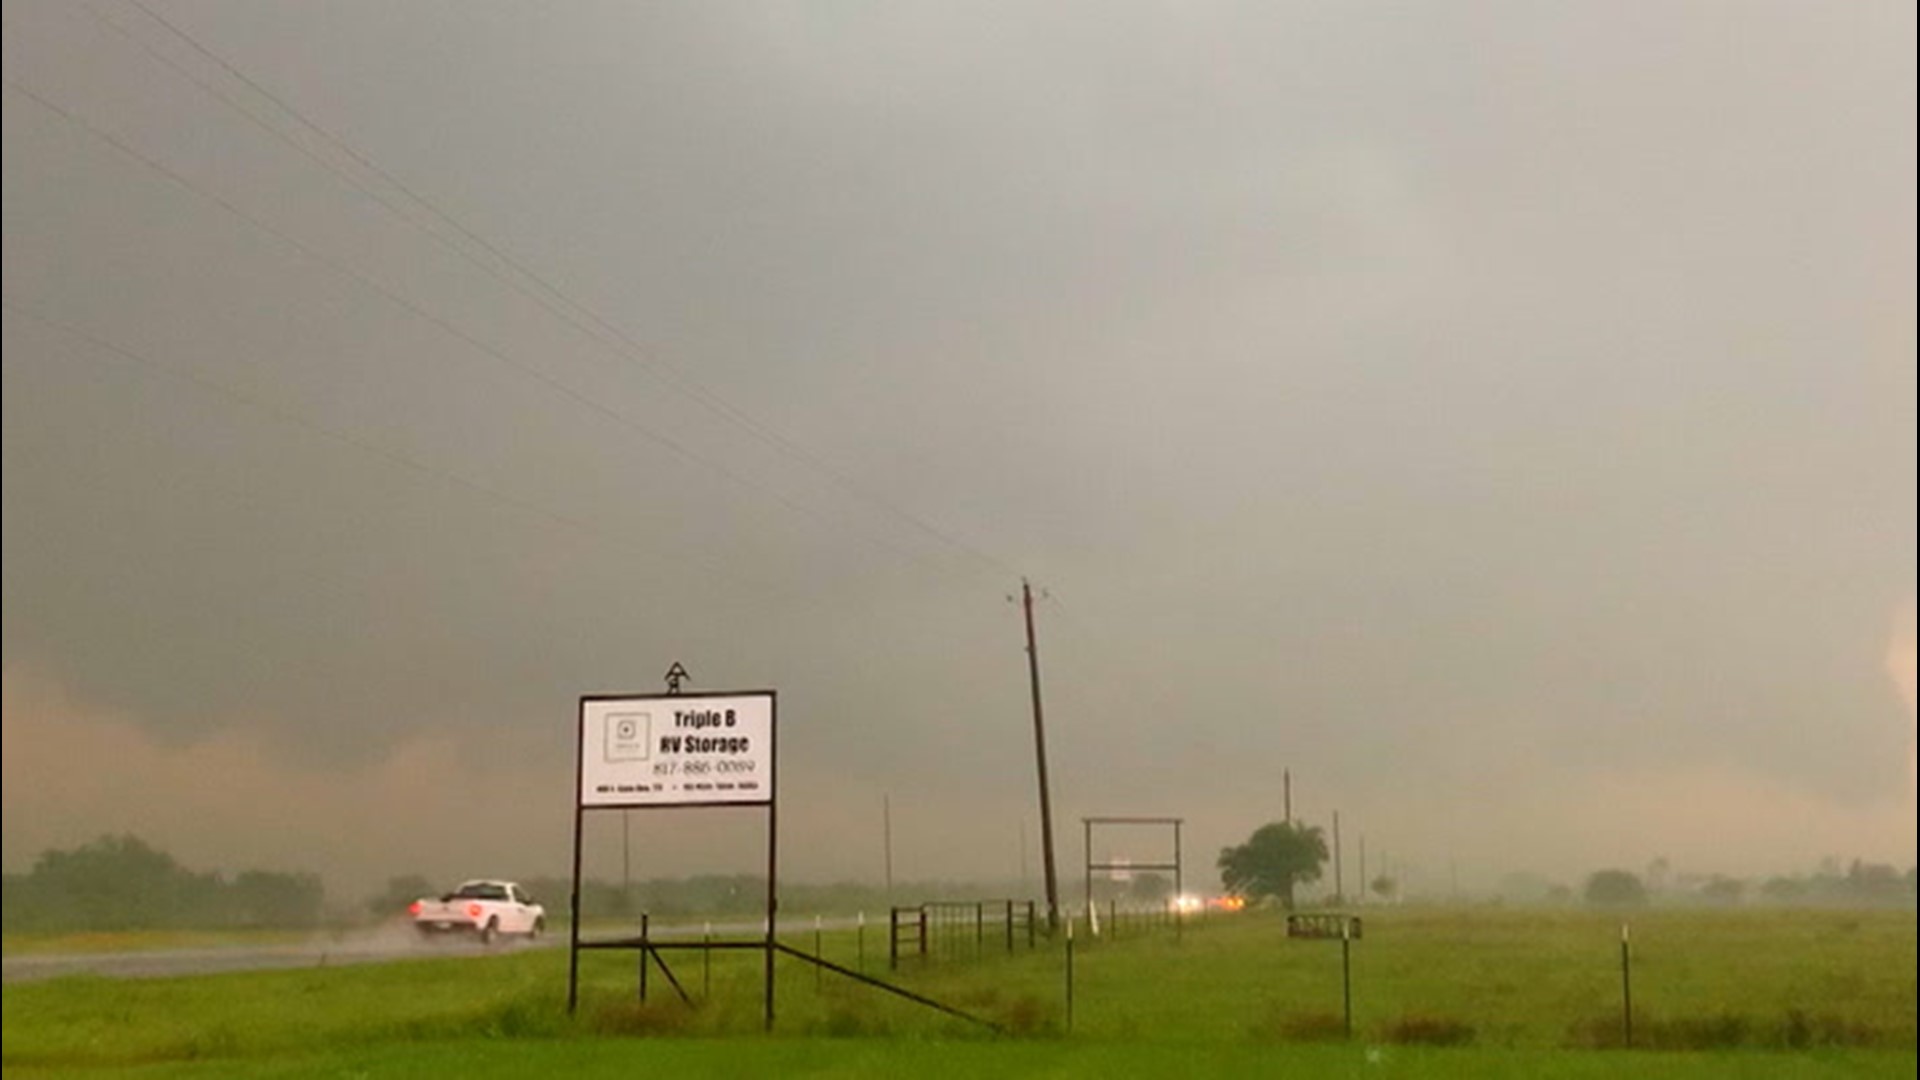 AccuWeather's Bill Wadell drove throughout the tornado-warned areas in Texas, such as Rio Vista and Godley, and captured this footage of hail, heavy rain and thunderstorms on Monday, May 3.